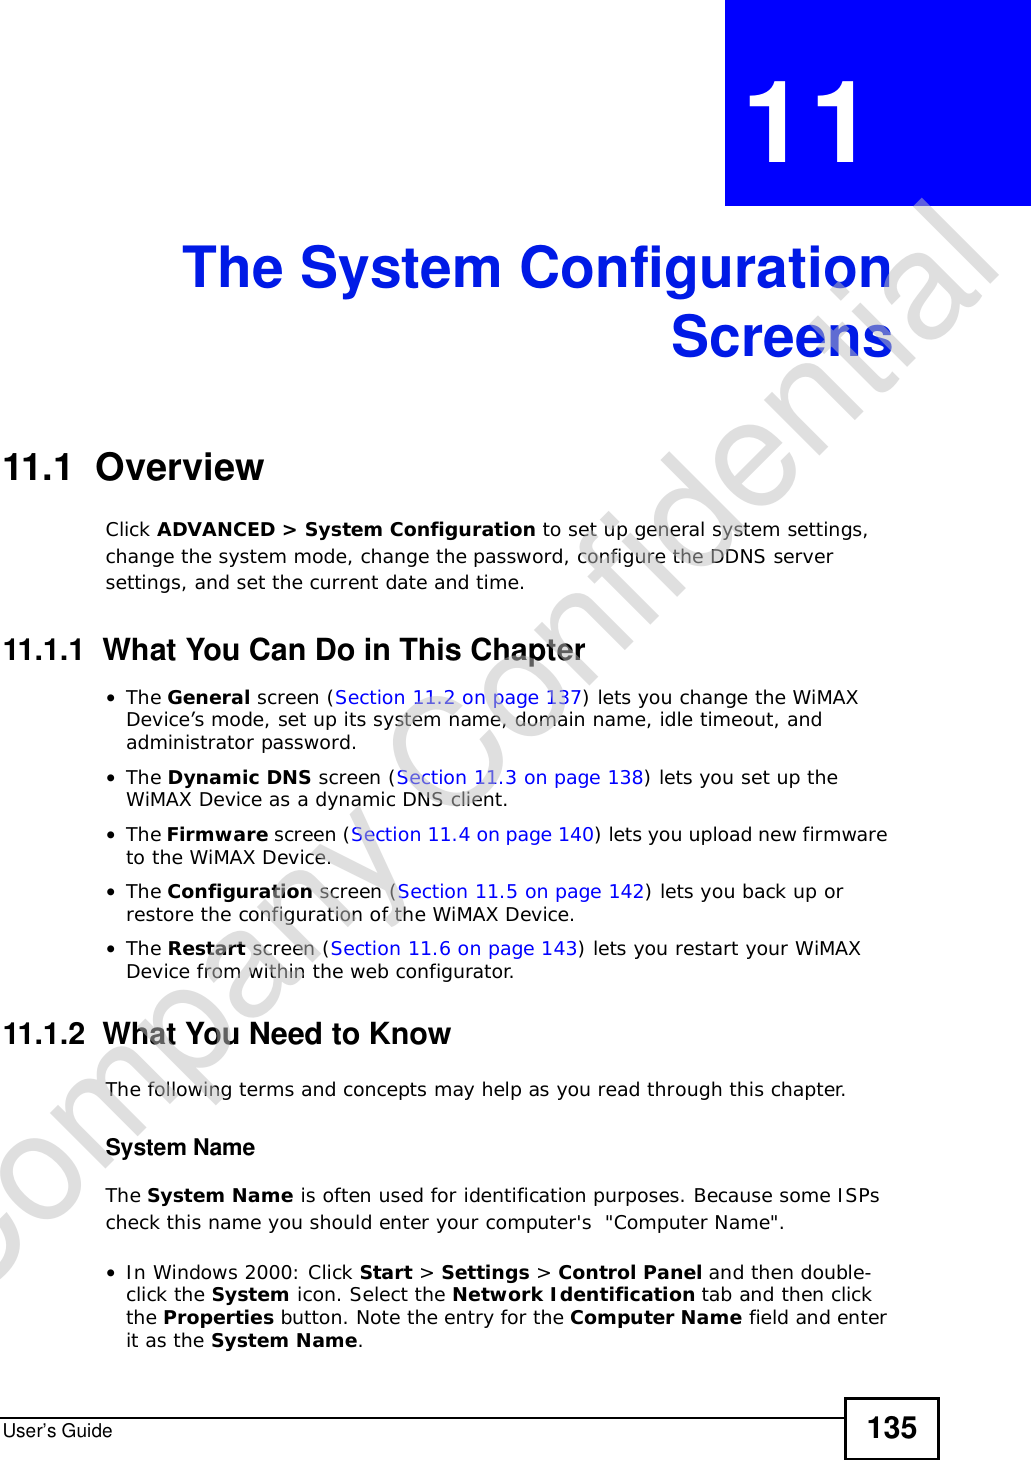 User’s Guide 135CHAPTER 11 The System ConfigurationScreens11.1  OverviewClick ADVANCED &gt; System Configuration to set up general system settings, change the system mode, change the password, configure the DDNS server settings, and set the current date and time.11.1.1  What You Can Do in This Chapter•The General screen (Section 11.2 on page 137) lets you change the WiMAX Device’s mode, set up its system name, domain name, idle timeout, and administrator password.•The Dynamic DNS screen (Section 11.3 on page 138) lets you set up the WiMAX Device as a dynamic DNS client.•The Firmware screen (Section 11.4 on page 140) lets you upload new firmware to the WiMAX Device.•The Configuration screen (Section 11.5 on page 142) lets you back up or restore the configuration of the WiMAX Device.•The Restart screen (Section 11.6 on page 143) lets you restart your WiMAX Device from within the web configurator.11.1.2  What You Need to KnowThe following terms and concepts may help as you read through this chapter.System NameThe System Name is often used for identification purposes. Because some ISPs check this name you should enter your computer&apos;s  &quot;Computer Name&quot;. •In Windows 2000: Click Start &gt; Settings &gt; Control Panel and then double-click the System icon. Select the Network Identification tab and then click the Properties button. Note the entry for the Computer Name field and enter it as the System Name.Company Confidential